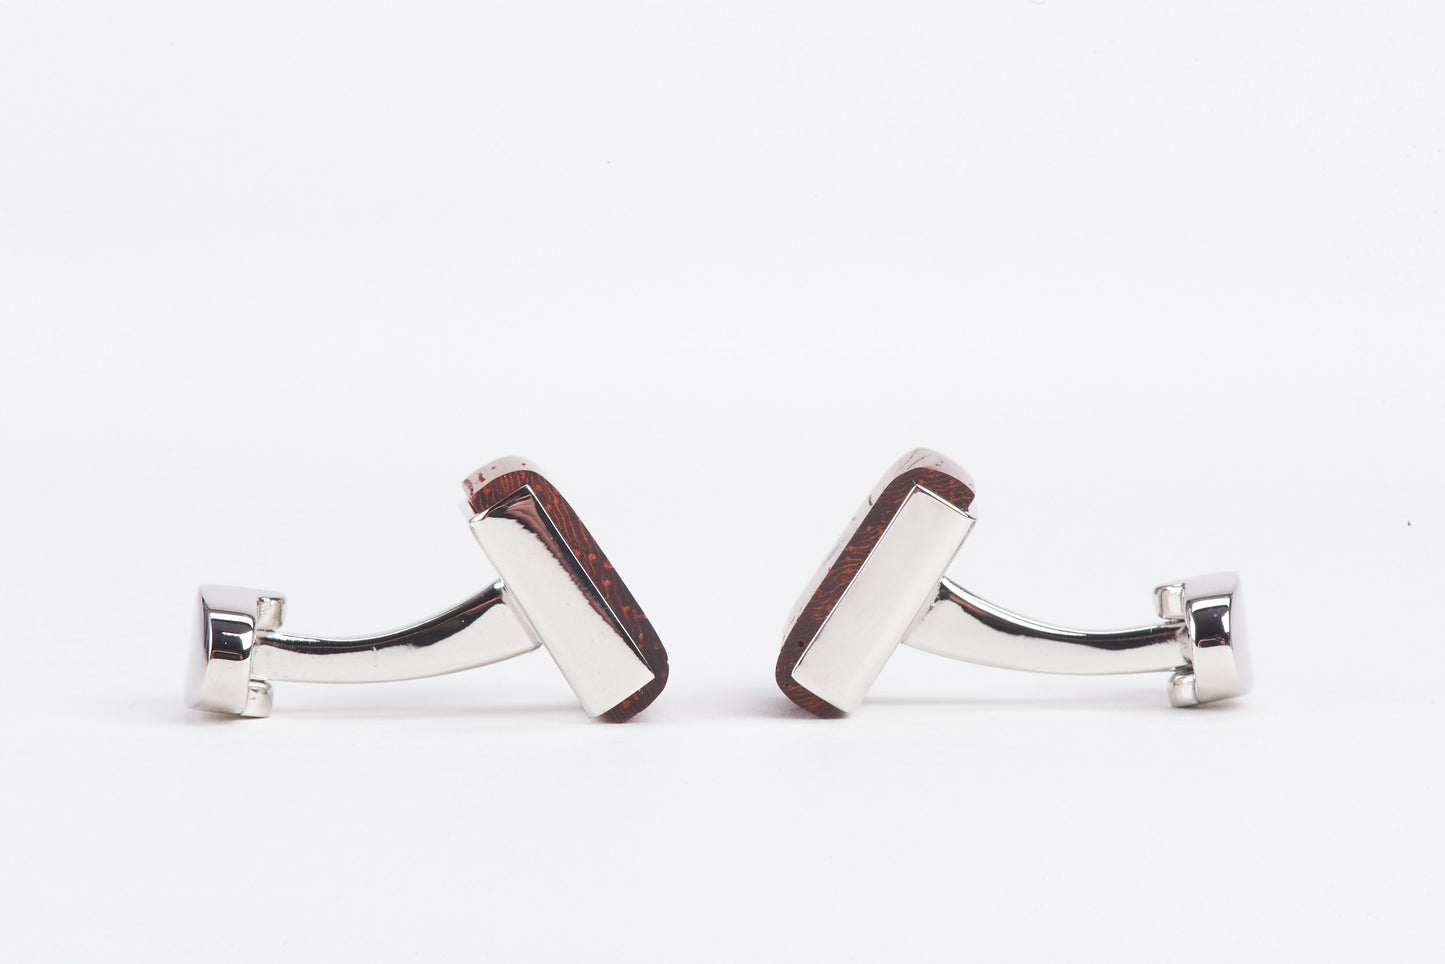 Wooden Cuff Links - Lucid and Real